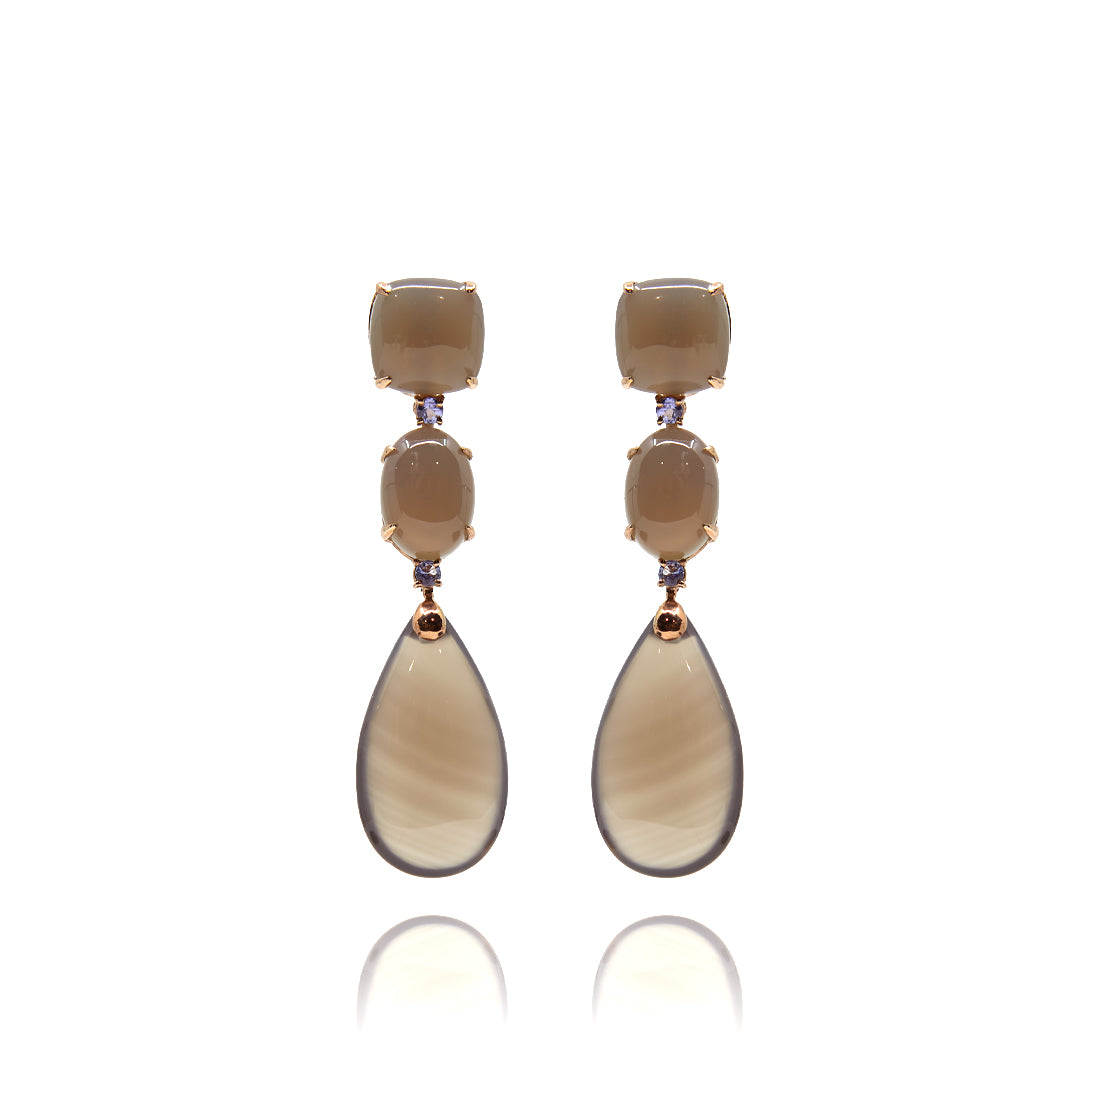 Rose gold earrings with agate and tanzanite